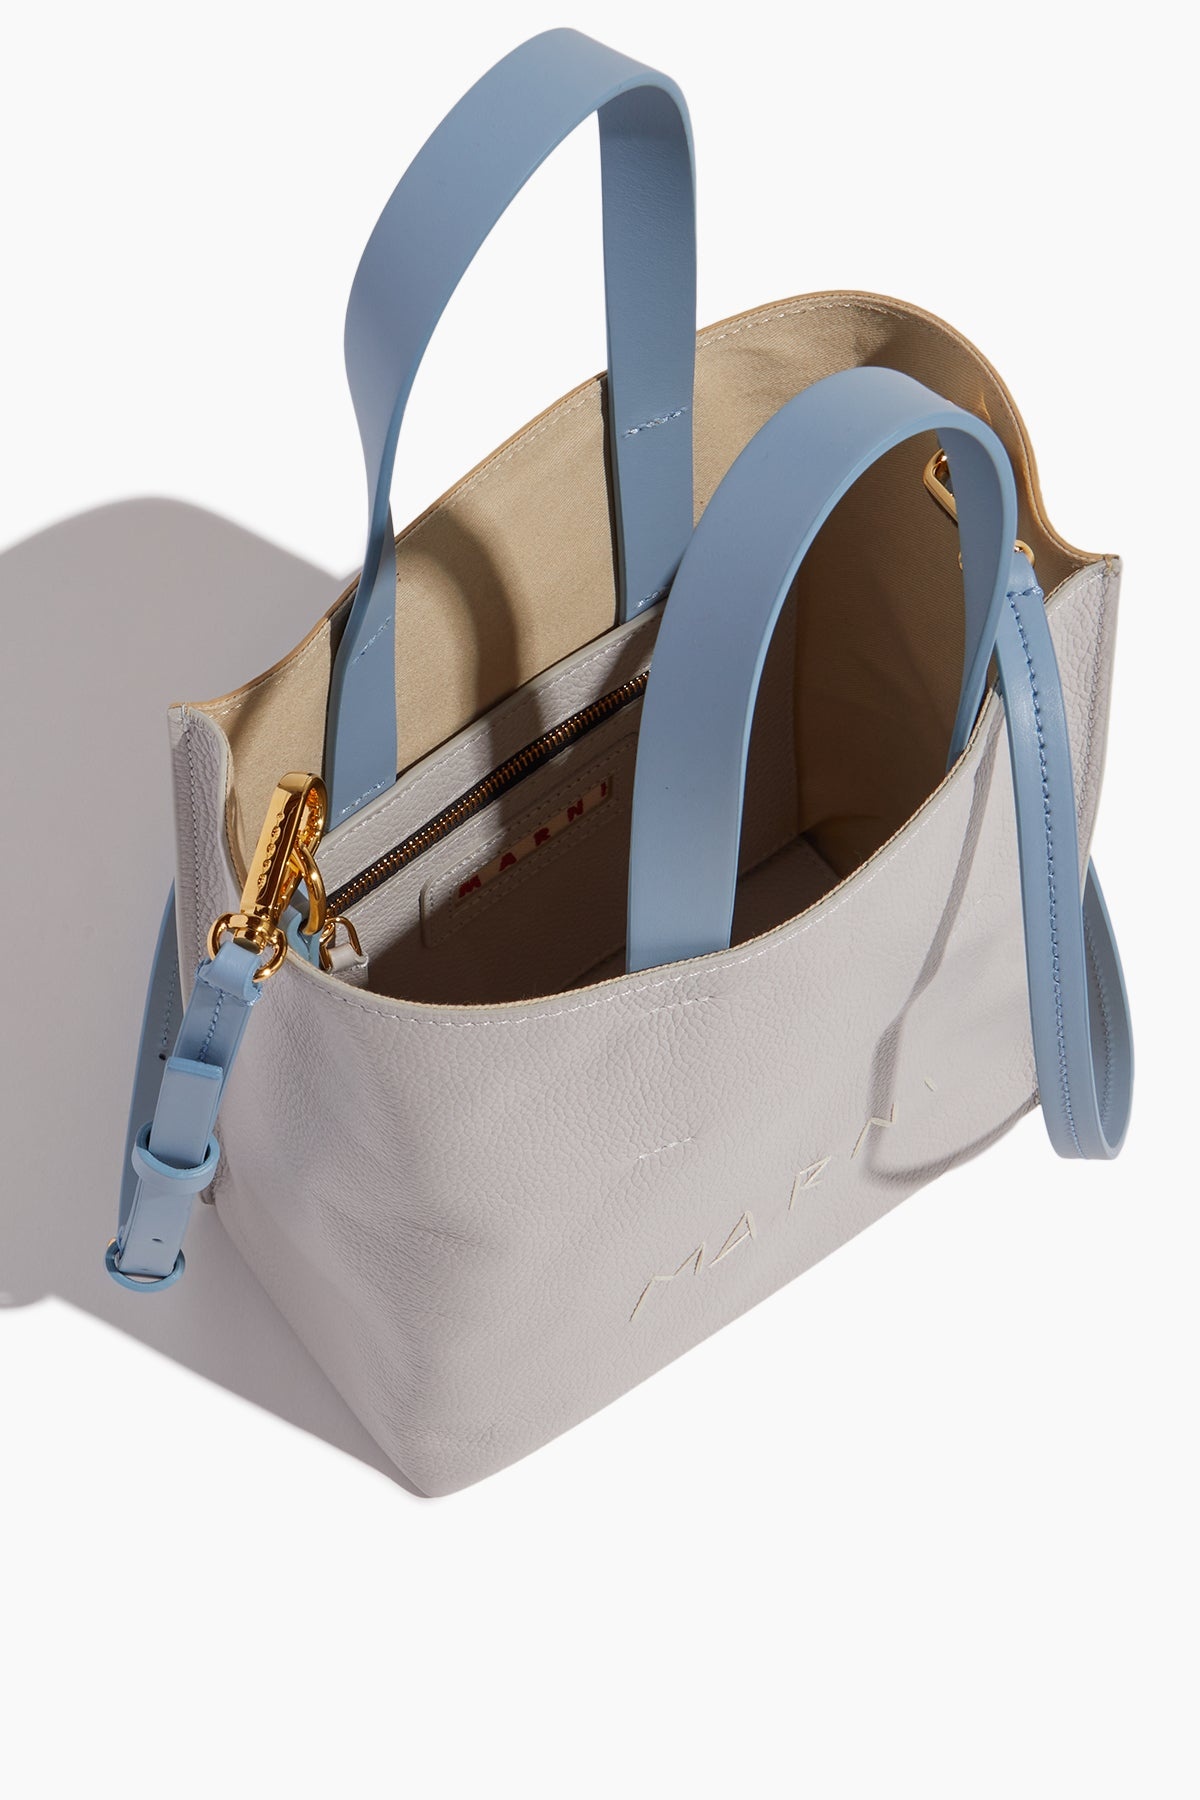 Museo Soft Mini Tote in Sodium/Nomad/Dusty Blue - 4